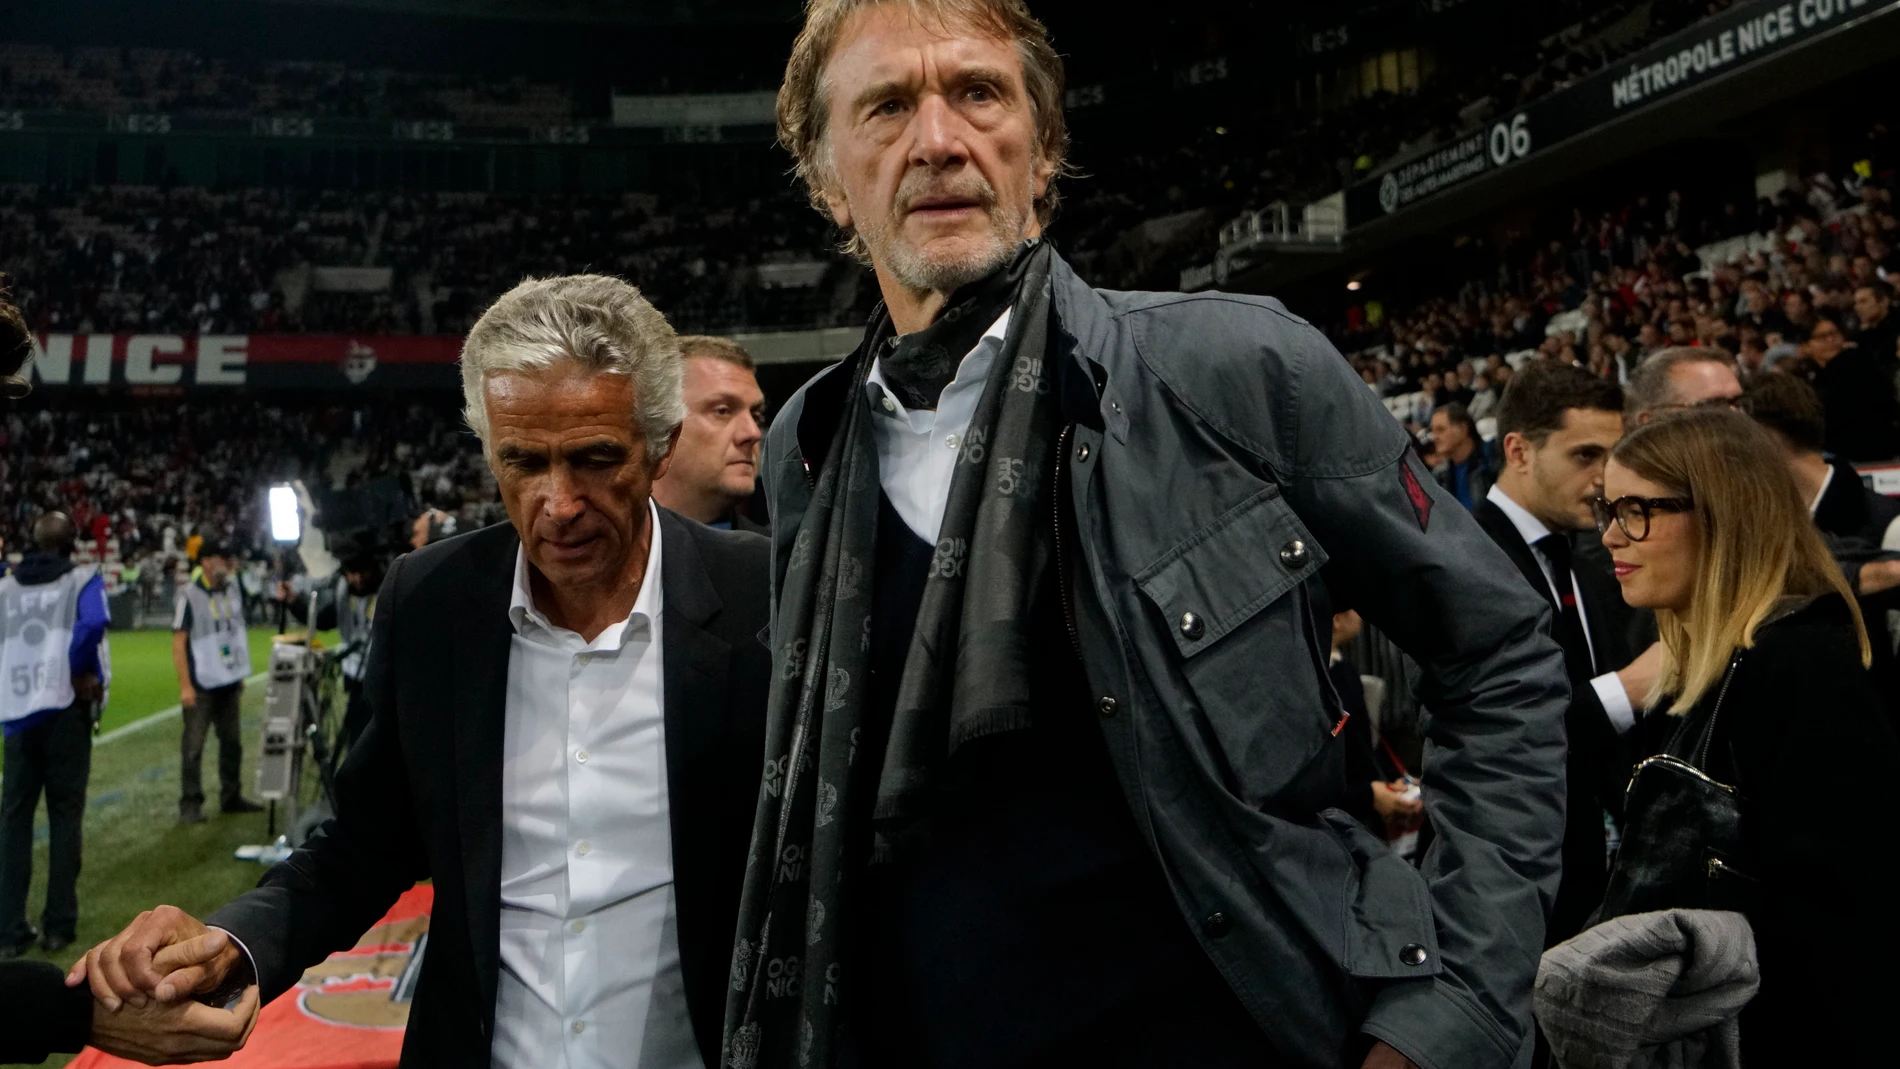 FILE - Sir Jim Ratcliffe looks on ahead of the French League One soccer match between Nice and Paris Saint Germain in Allianz Riviera stadium in Nice, southern France, on Oct.18, 2019. More than a year after it was put up for sale, Manchester United said Sunday that British billionaire Jim Ratcliffe had agreed to buy a minority stake in the storied Premier League club. Ratcliffe, who owns petrochemicals giant INEOS and is one of Britain’s richest people, has bought a stake of “up to 25%” of t...